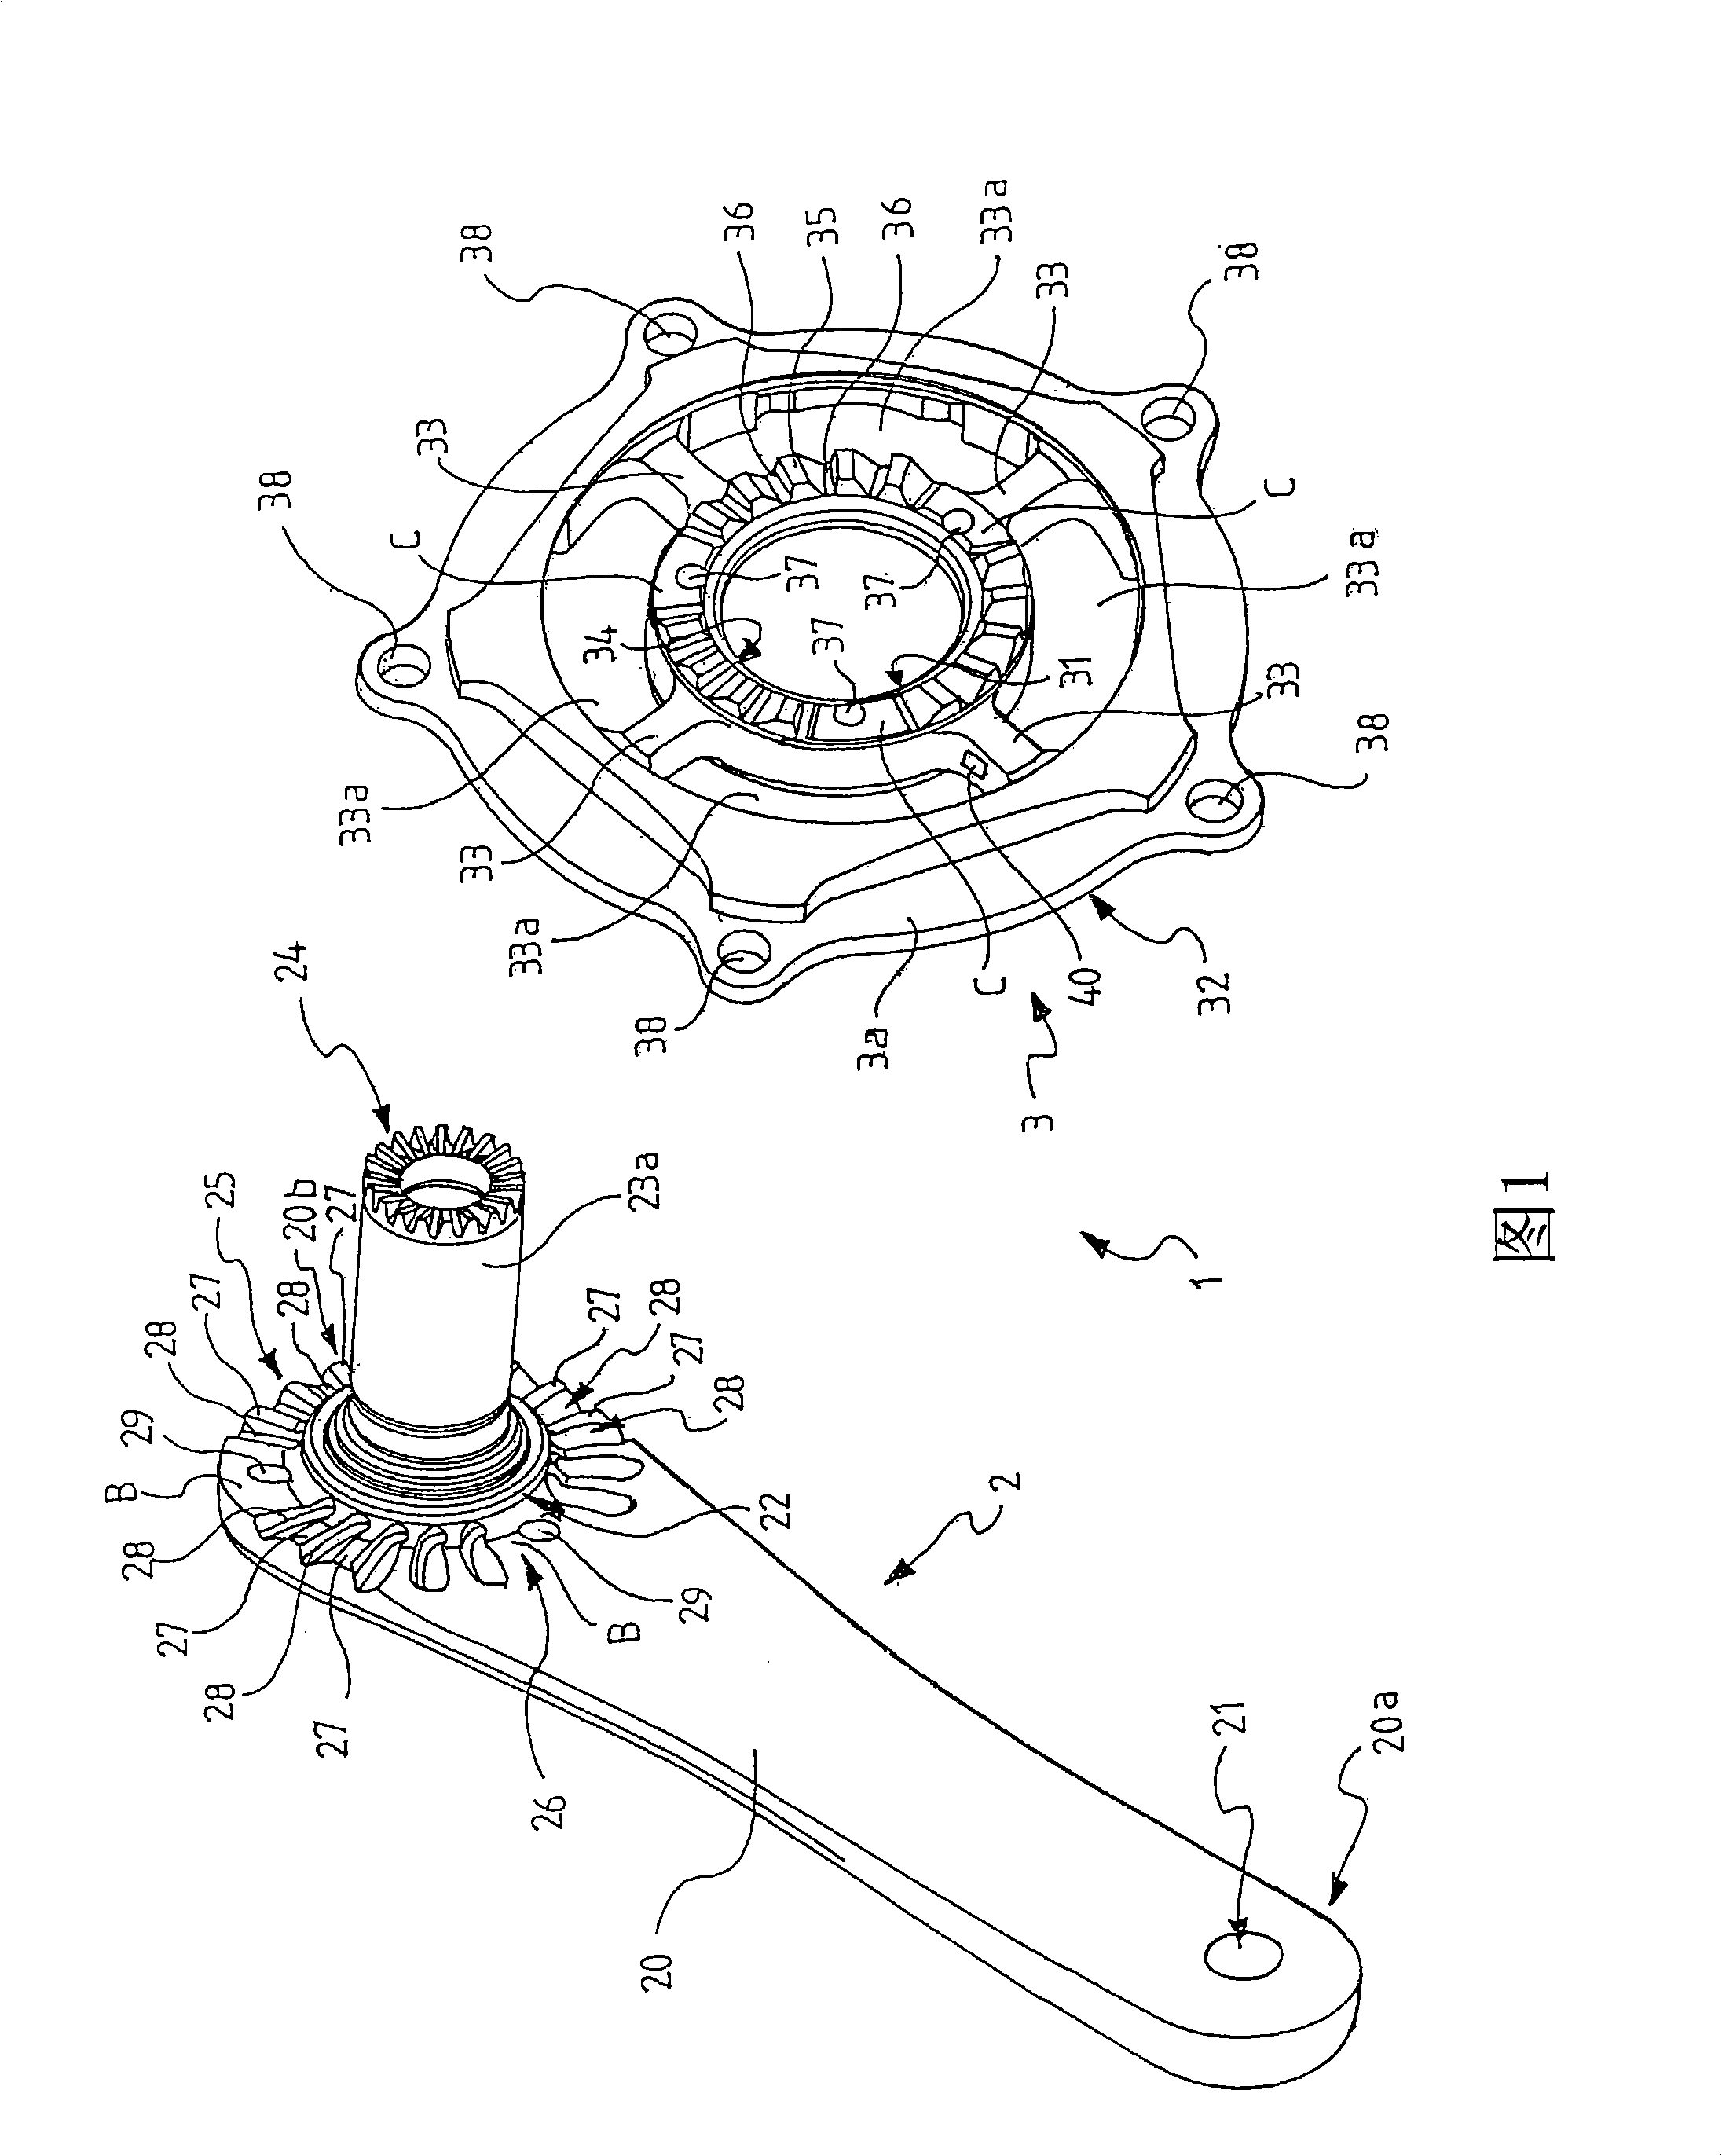 Crank arm assembly and related crank arm and element for transmitting torque from the crank arm to a bicycle chain